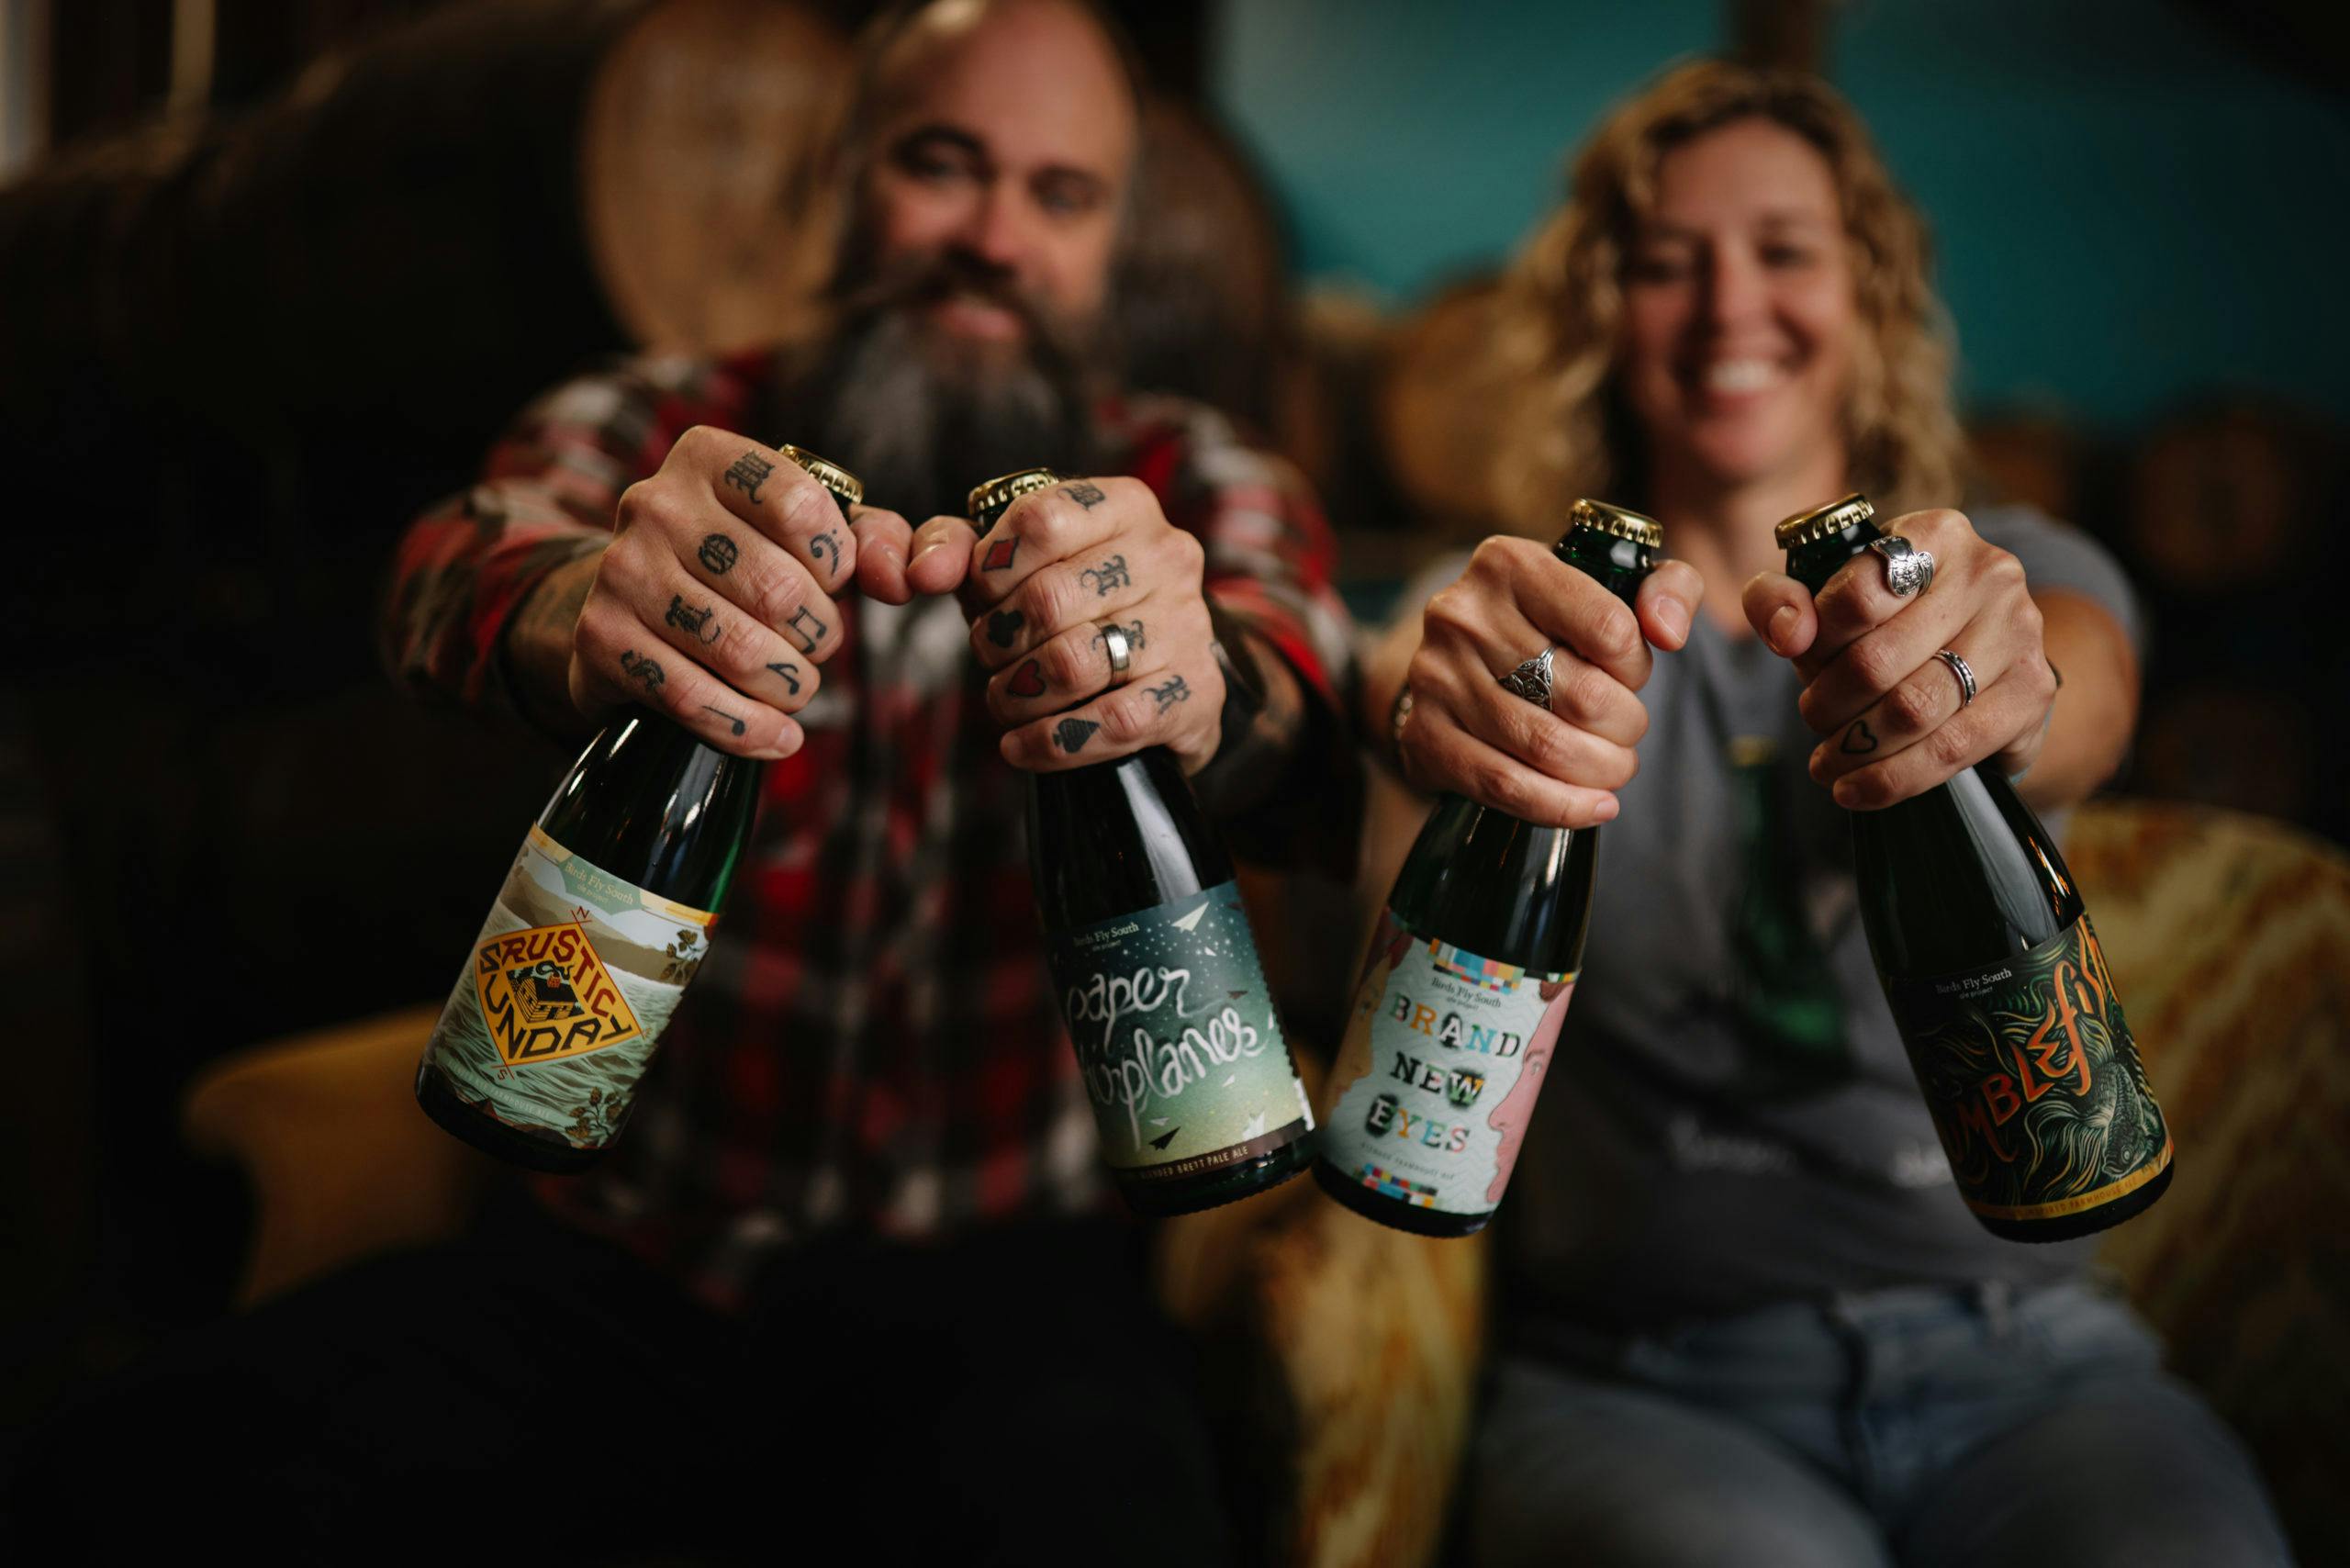 Birds Fly South Ale Project owners Shawn & Lindsay Johnson